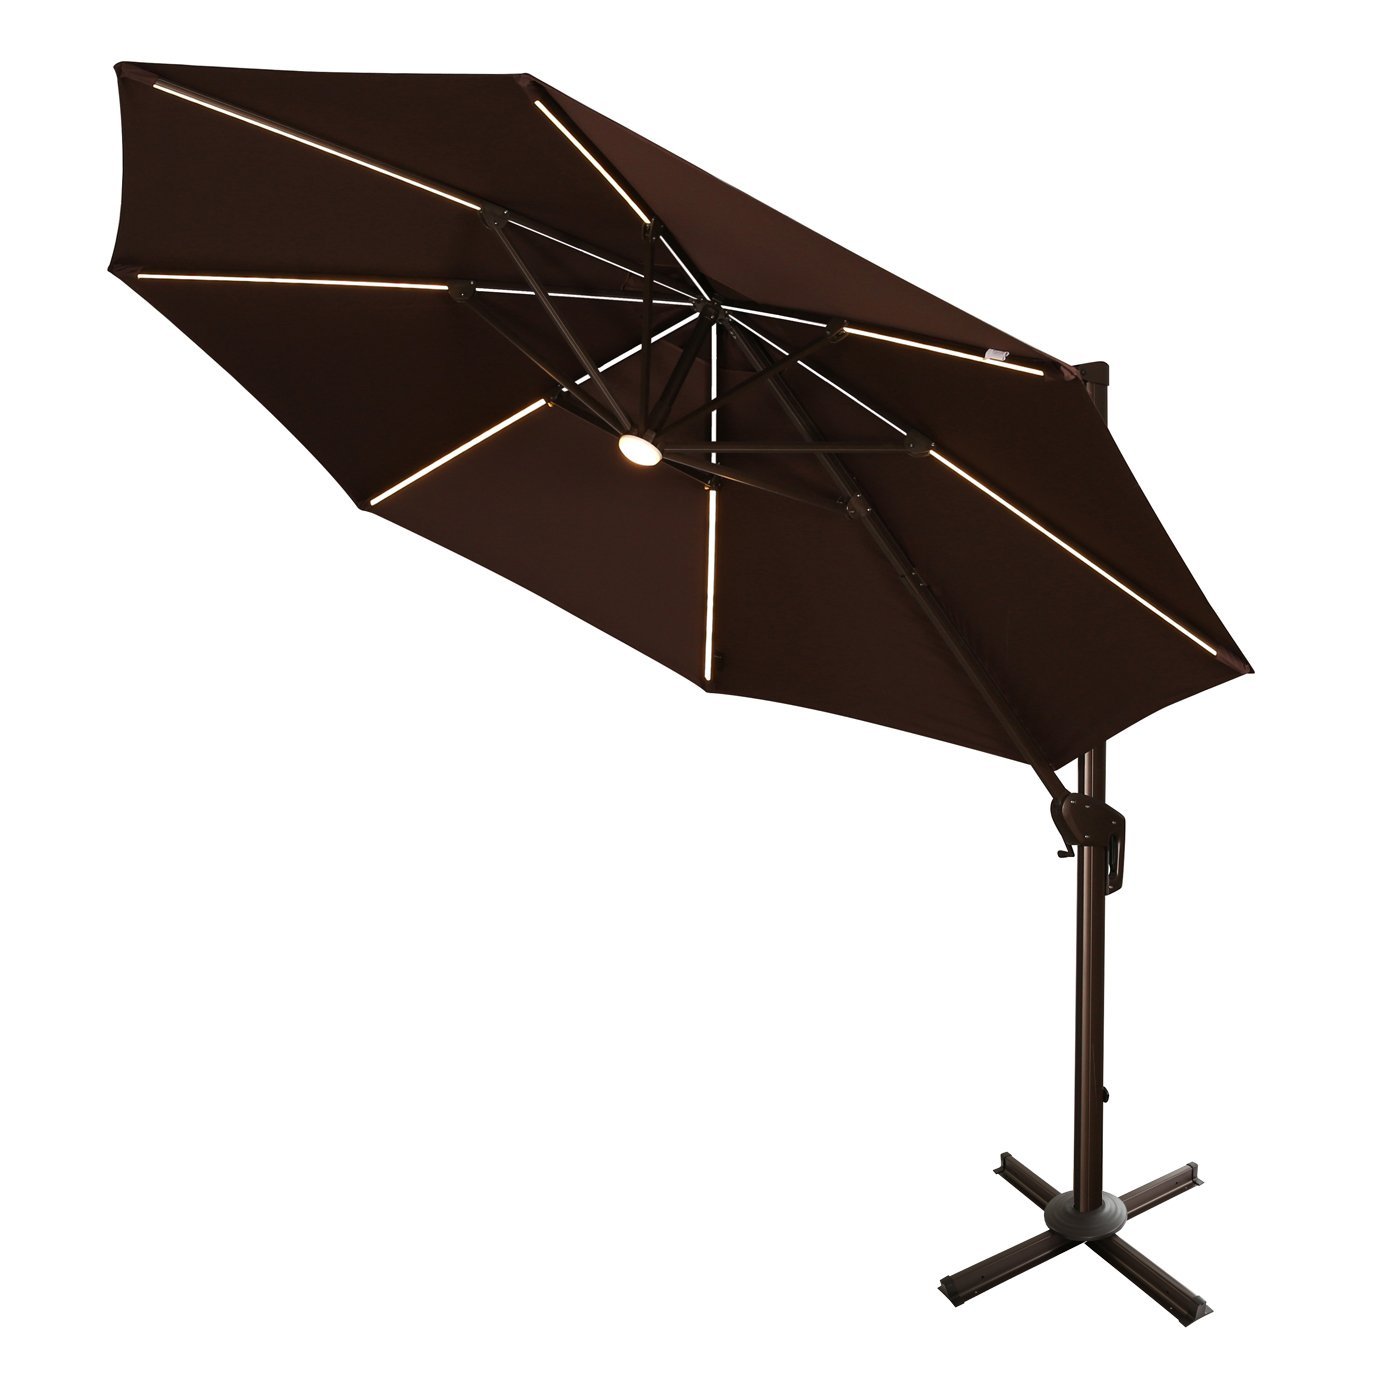 Review of Ulax furniture 360 degree Rotation 11 Ft Deluxe Solar Powered LED Lights Outdoor Offset Hanging Market Umbrella